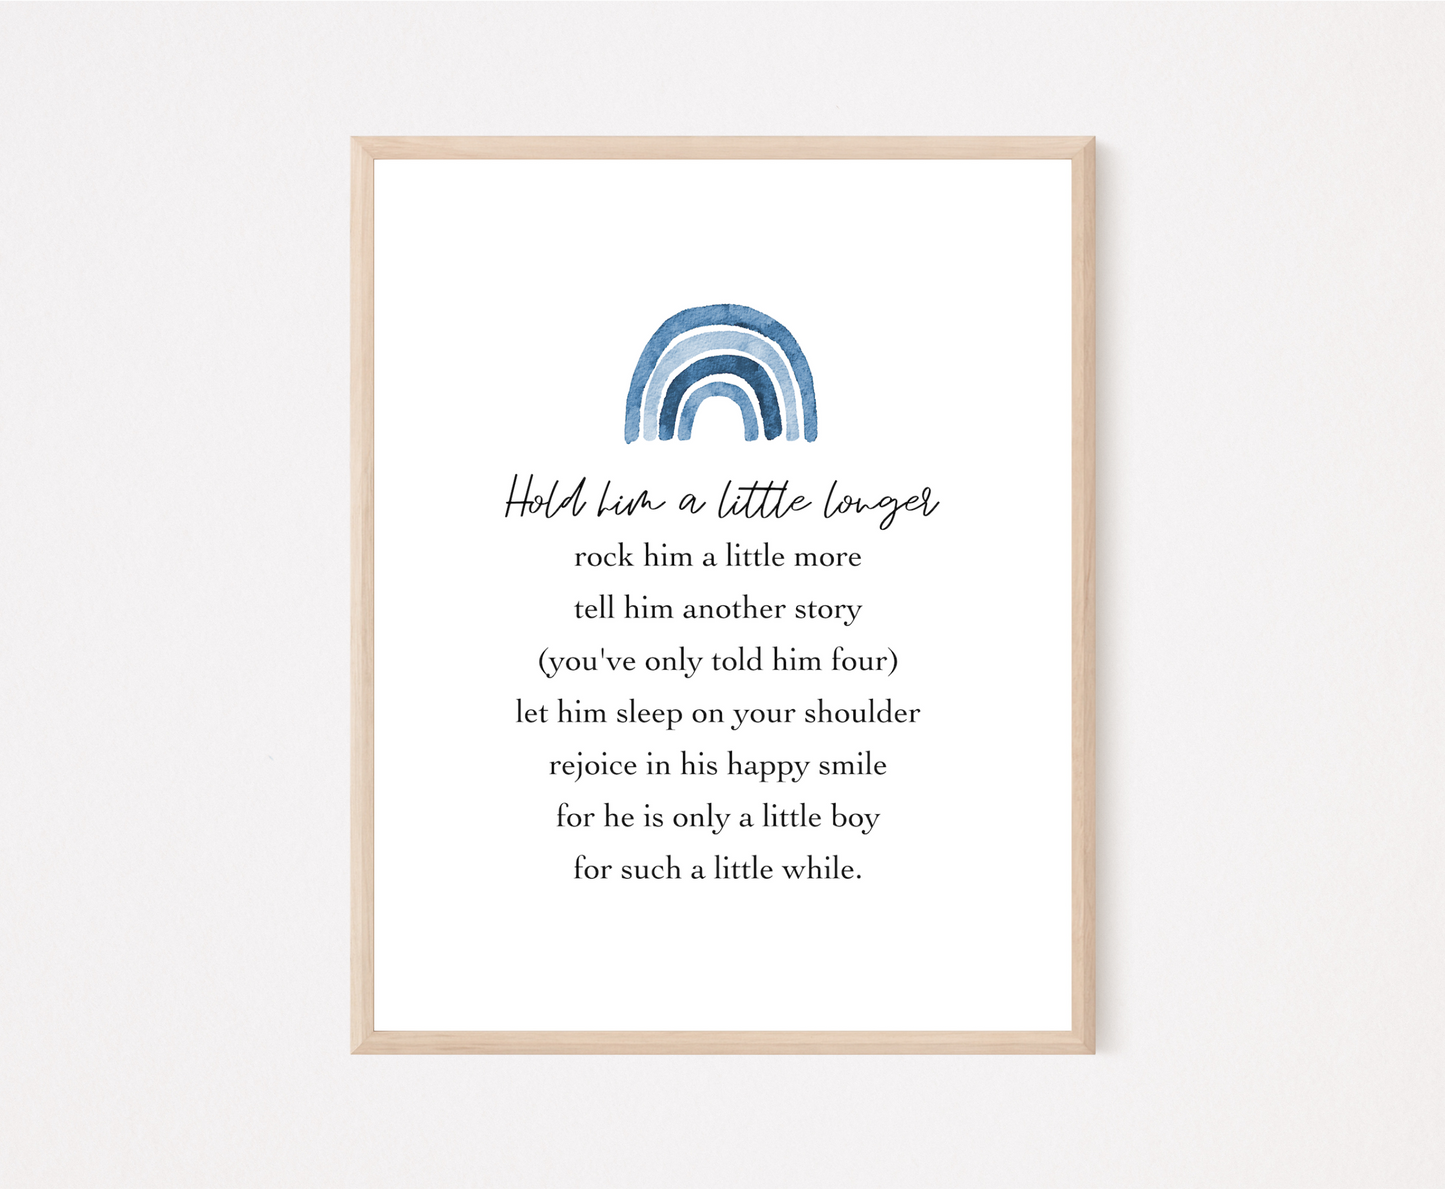 A digital print that has a blue rainbow at the top, and a piece of writing that says: Hold him a little longer, rock him a little more, tell him another story, (you have only told him four), let him sleep on your shoulder, rejoice in his happy smile, for he is only a little boy, for such a little while.